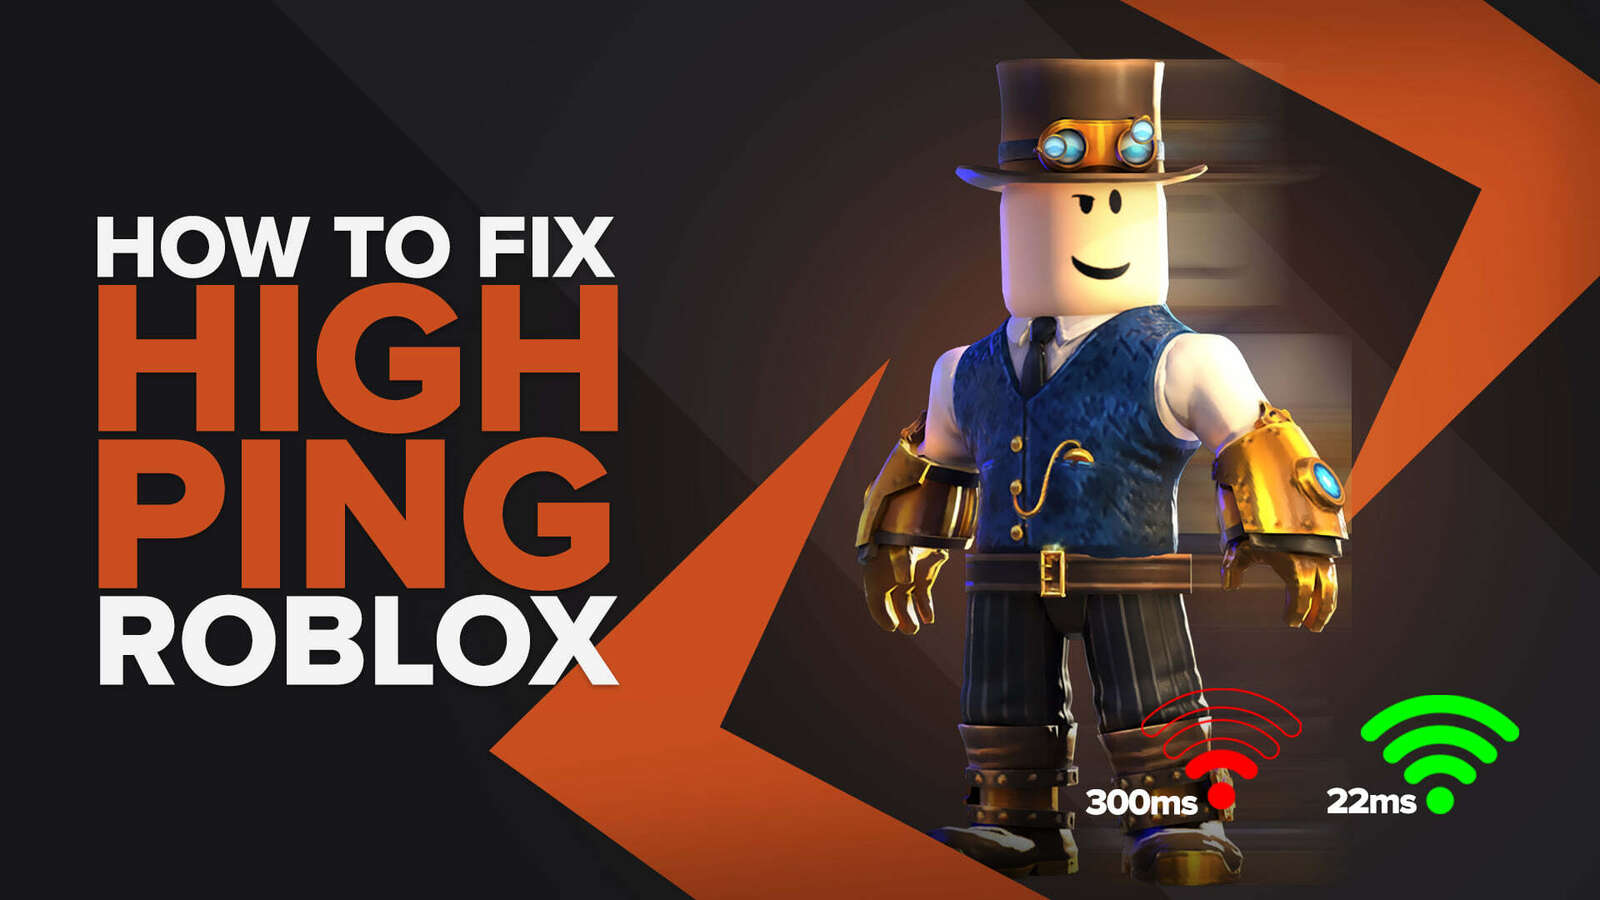 How To Fix High Ping In Roblox Quickly? (9 Easy Methods)